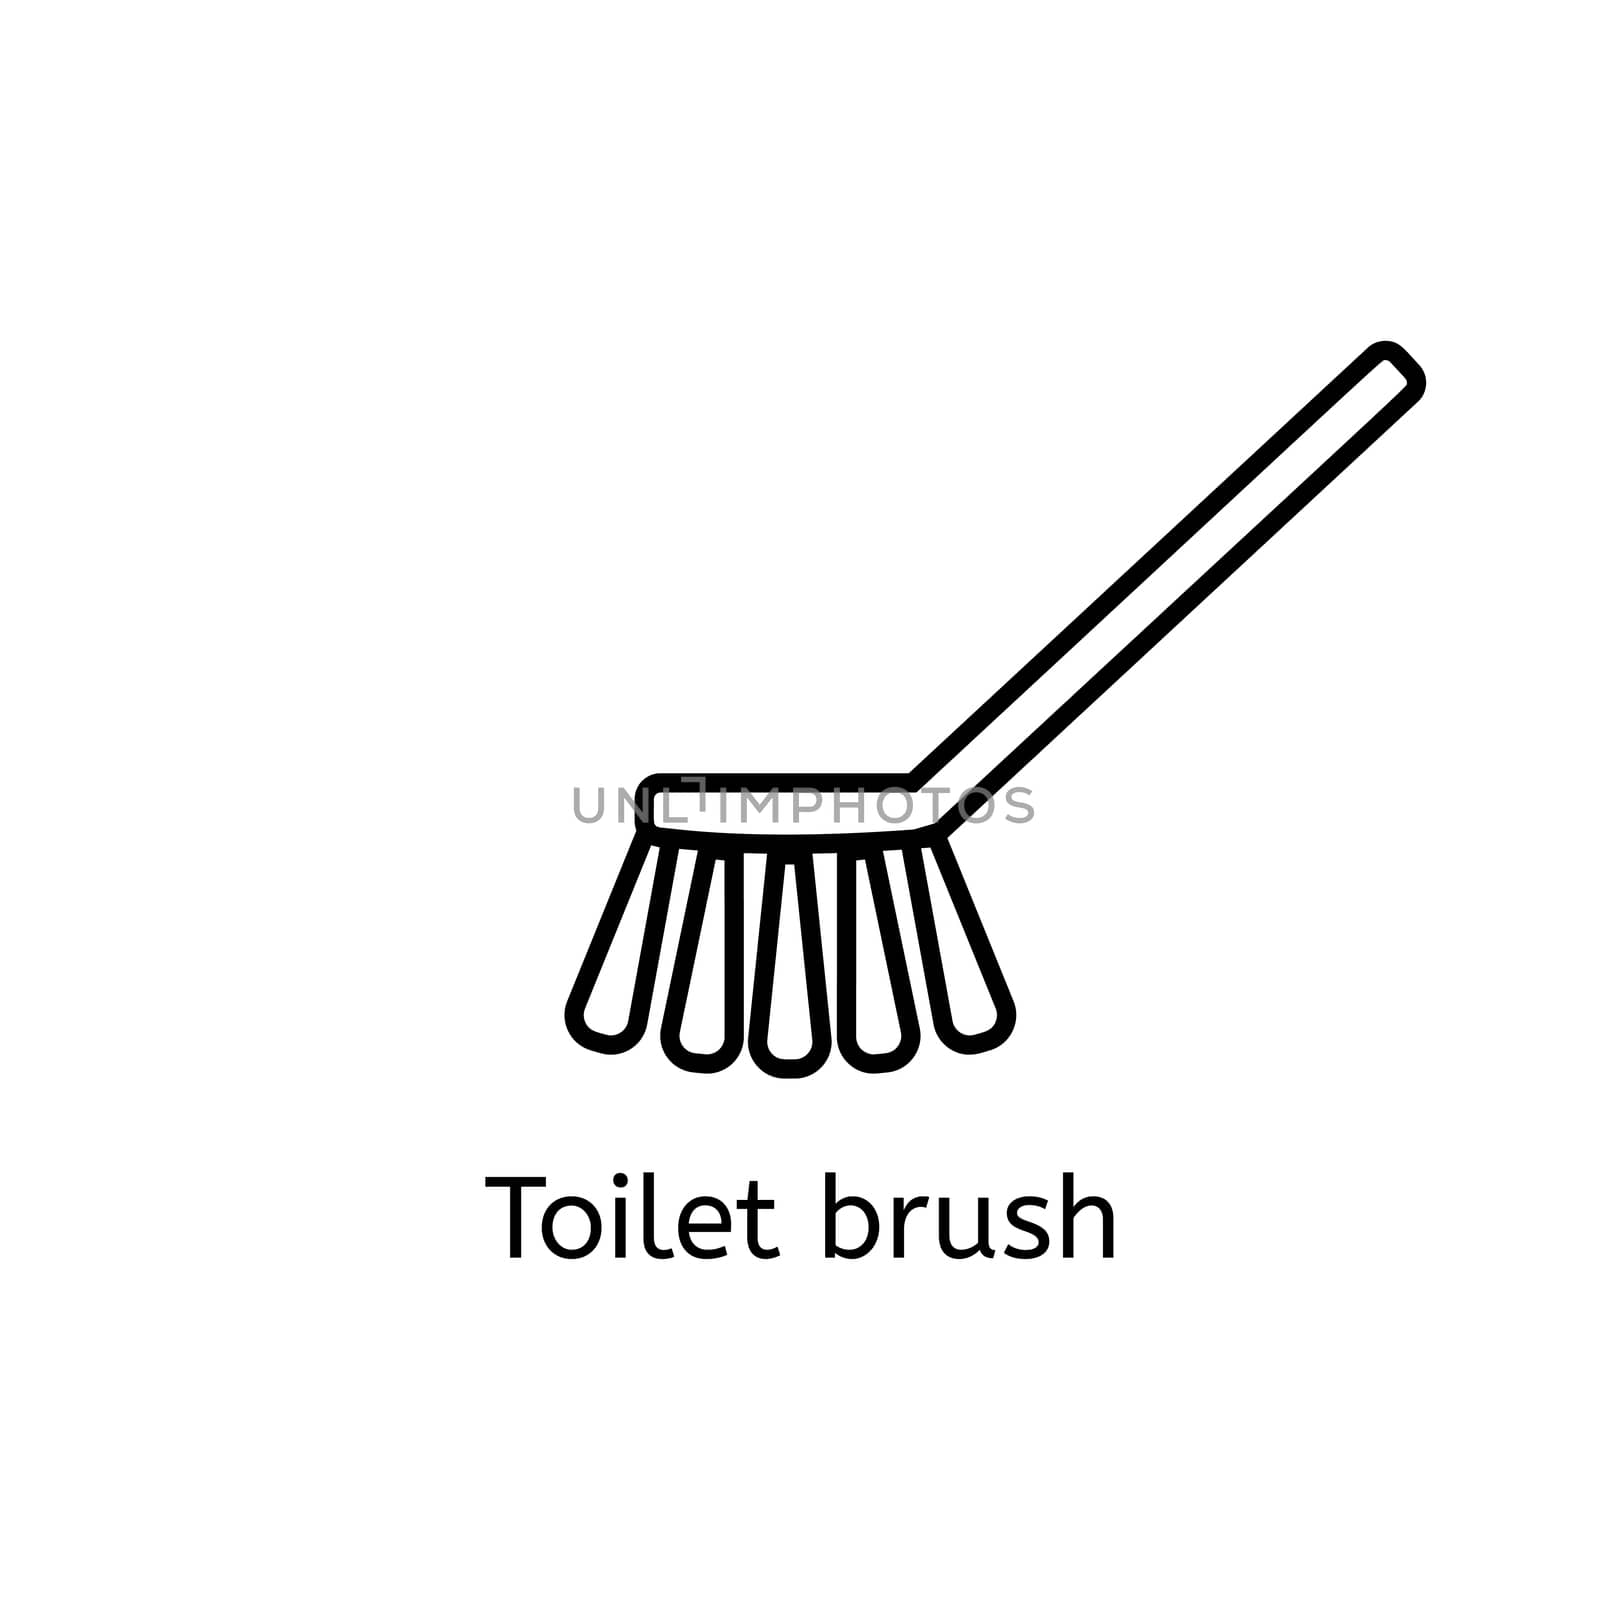 Toilet brush simple line icon. Washing brush thin linear signs. Bathroom cleaning simple concept for websites, infographic, mobile app.